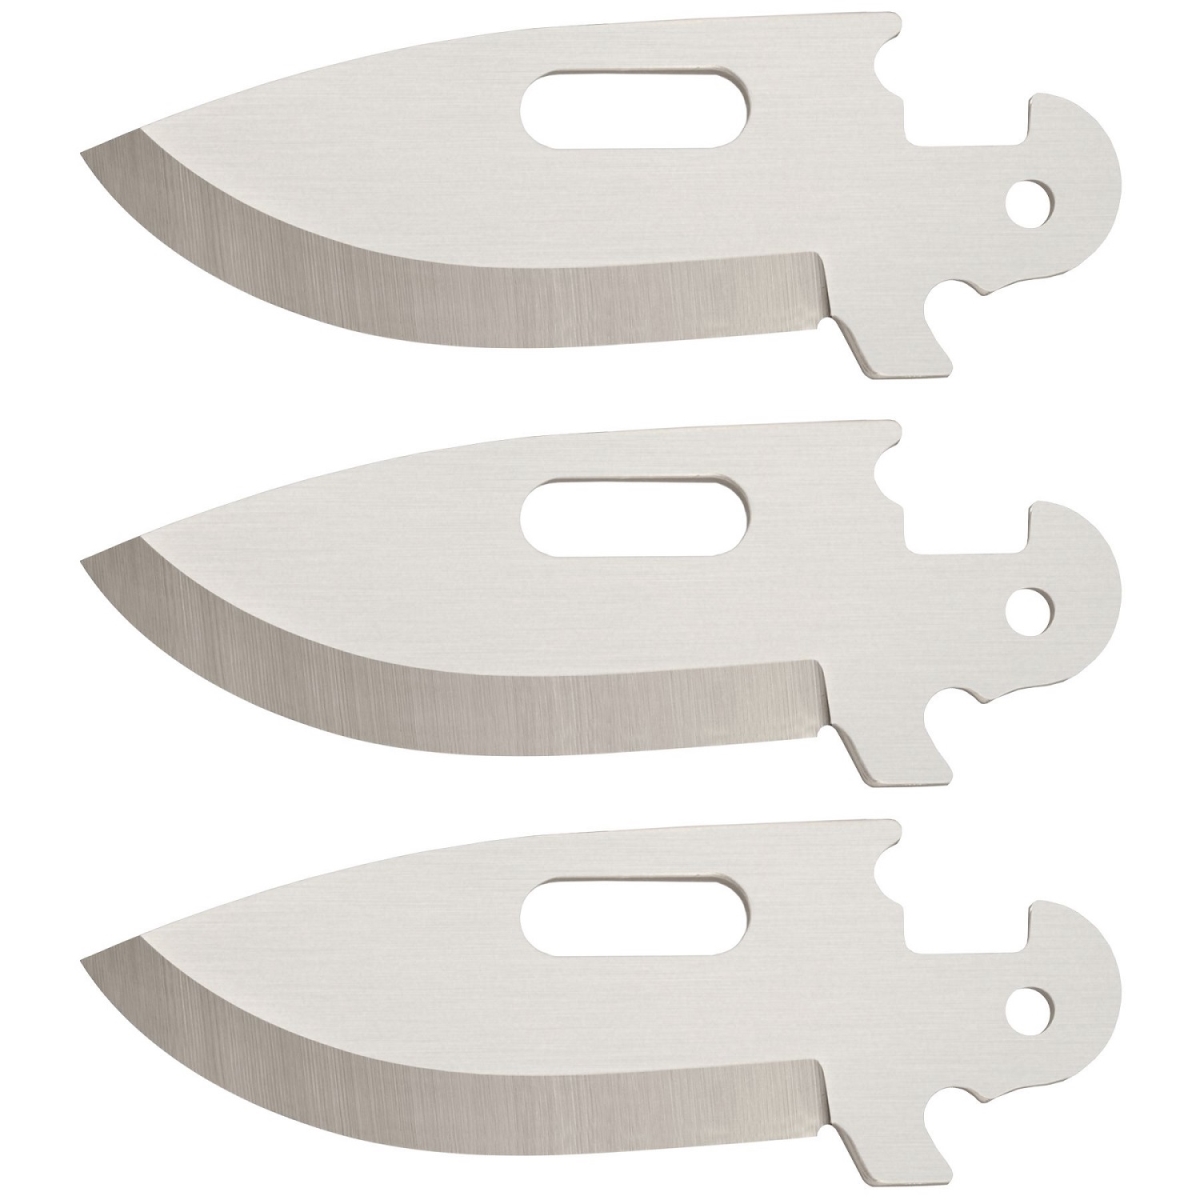 Cold Steel 4019631 2.5 in. Click N Cut Drop Point Replacement Blades, 3 Piece